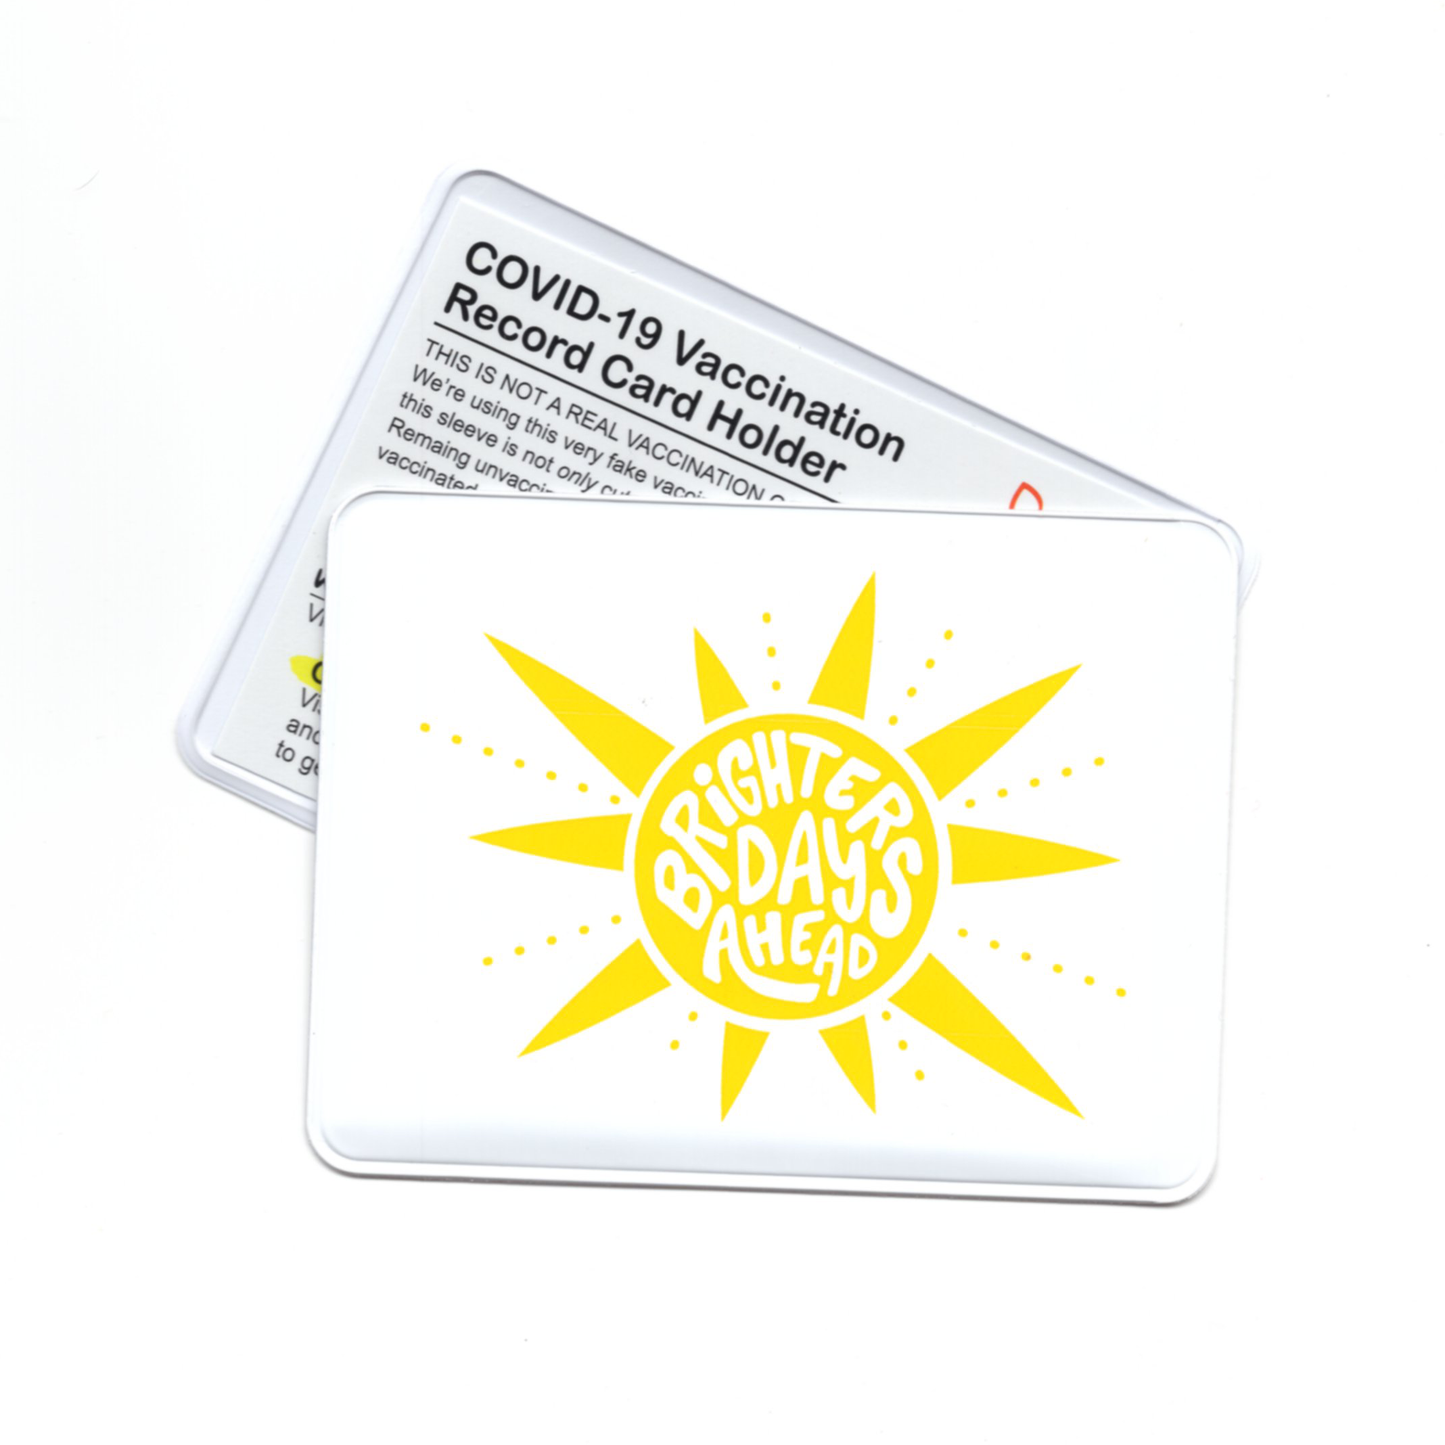 Brighter Days Ahead Vaccination Card Holder